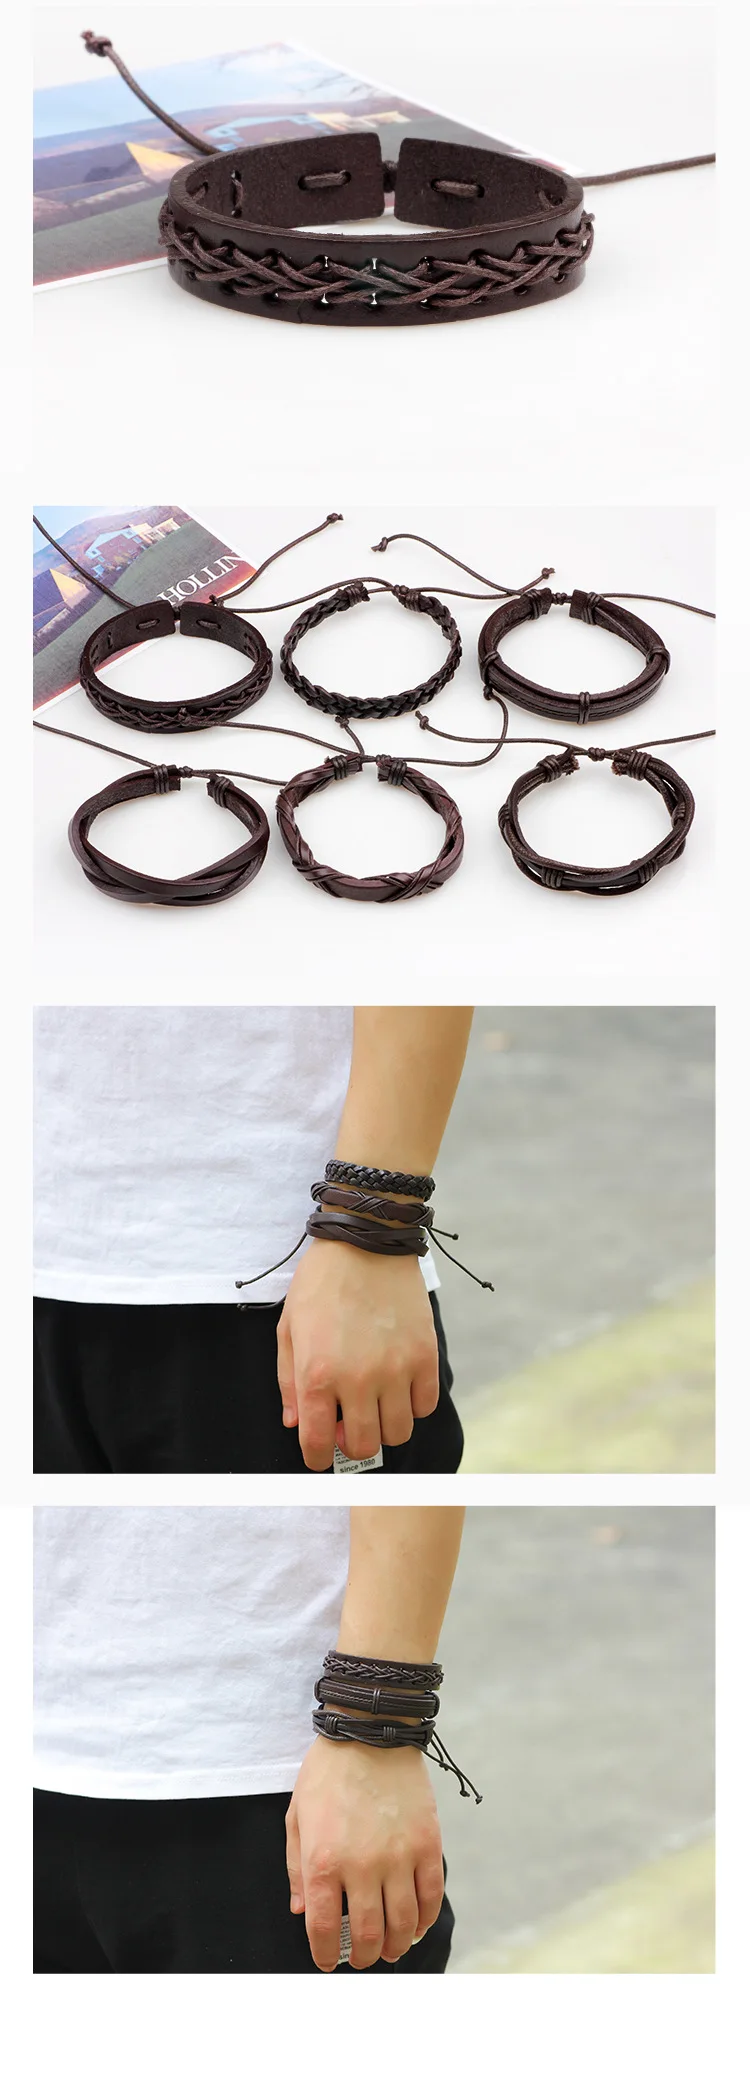 New Jewelry Six-piece Leather Wax Rope Multiple Hand-woven Men's Leather  Bracelet Punk Adjustablebangles